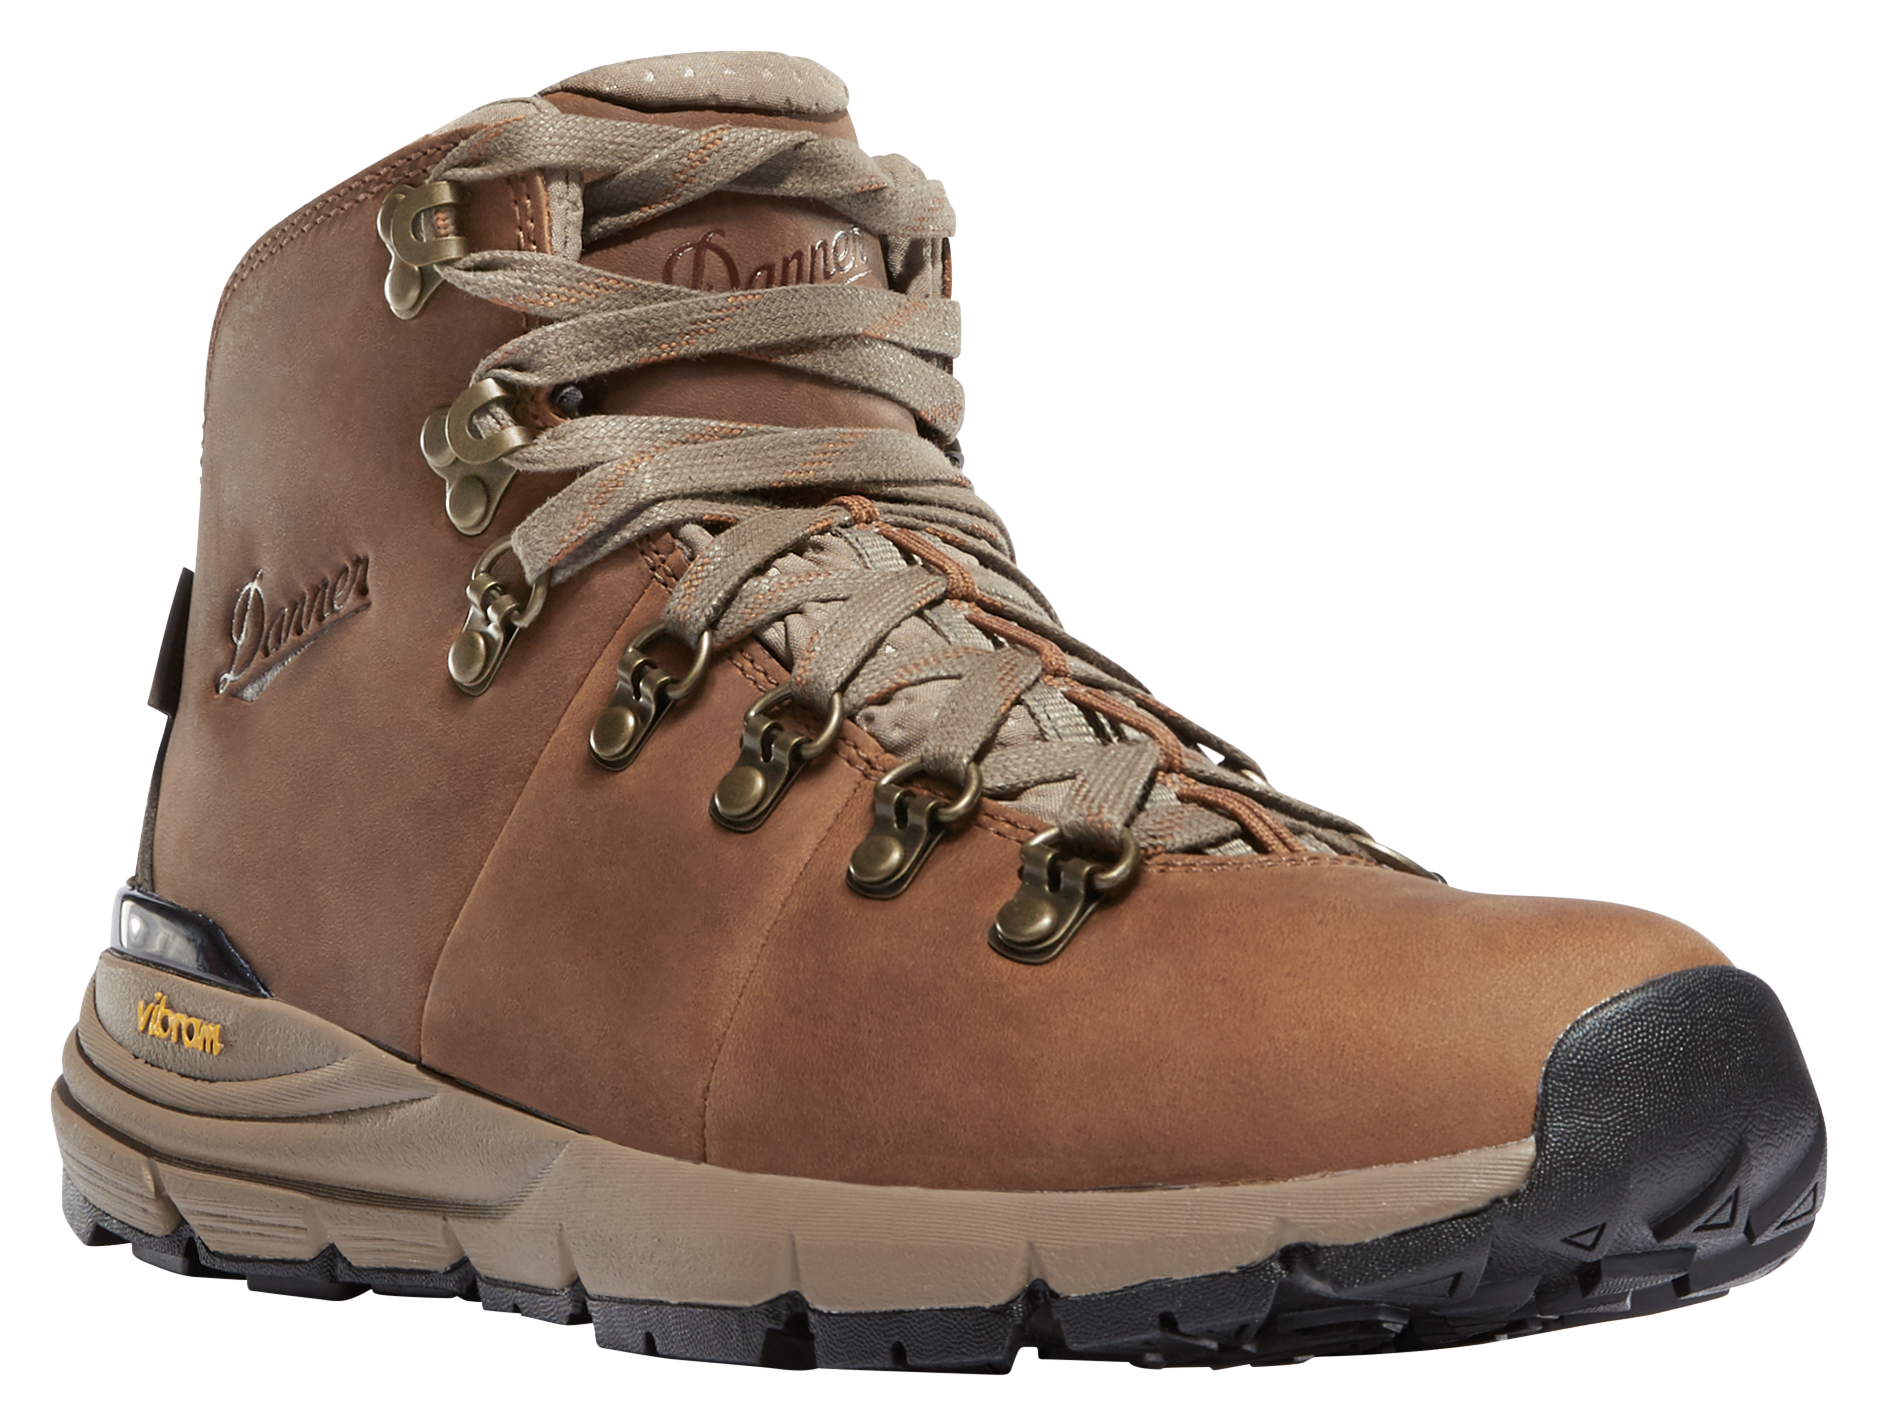 Danner Mountain 600 Leather Waterproof Hiking Boots for Ladies - Rich Brown - 11M